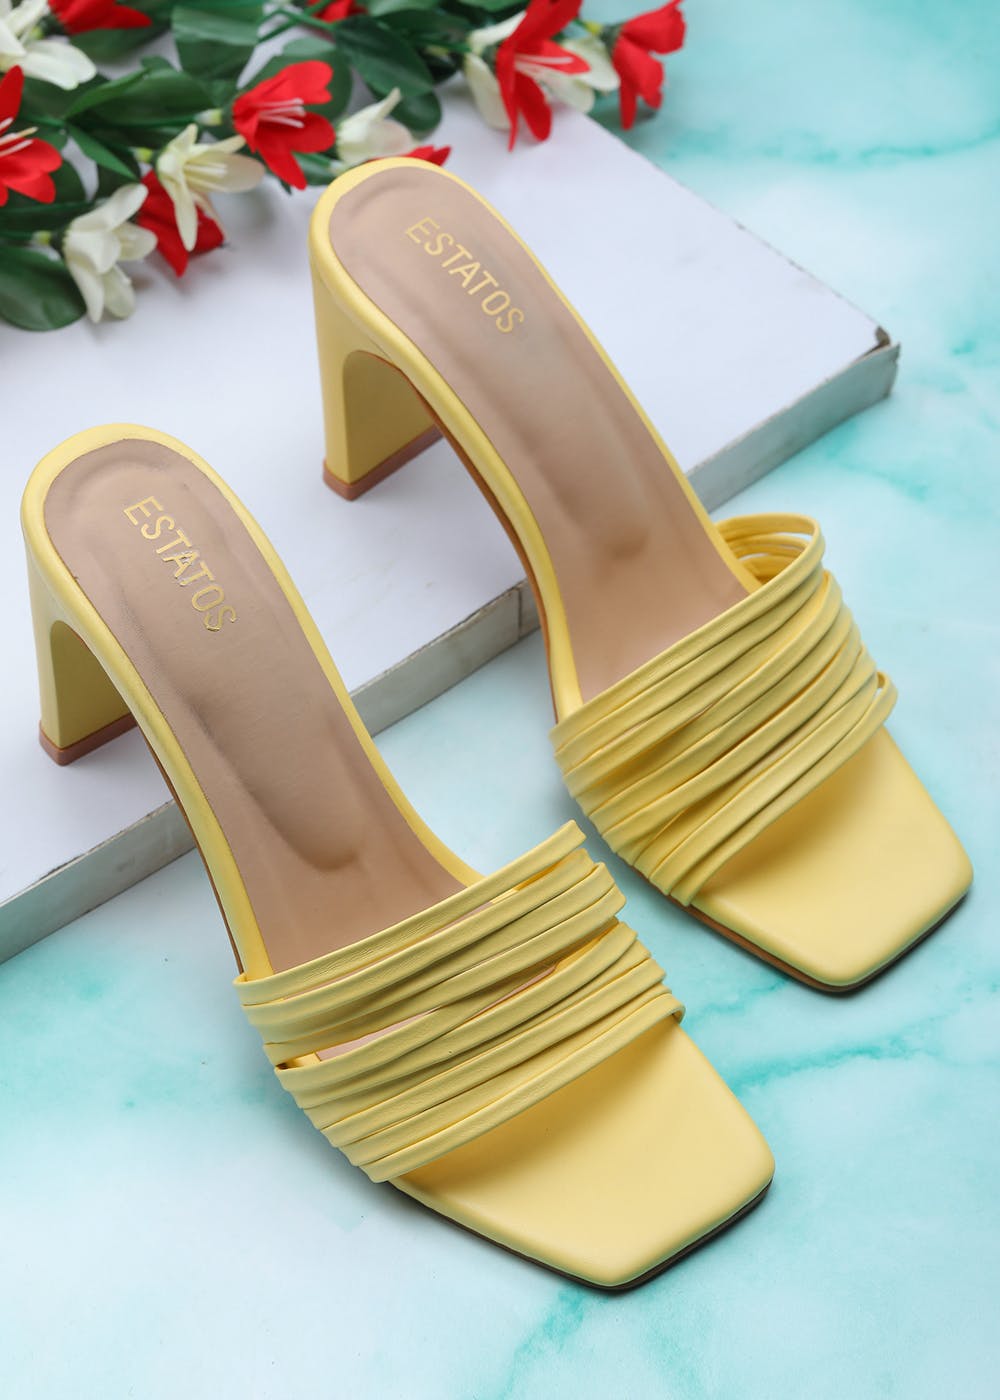 Green Stretch Muller High Heel Green Sandals Heels For Women Designer  Leather Square Toe Slippers With Stiletto Heels, Perfect For Summer Parties  And Transparent Dress Shoe Design From Dayremit, $70.56 | DHgate.Com